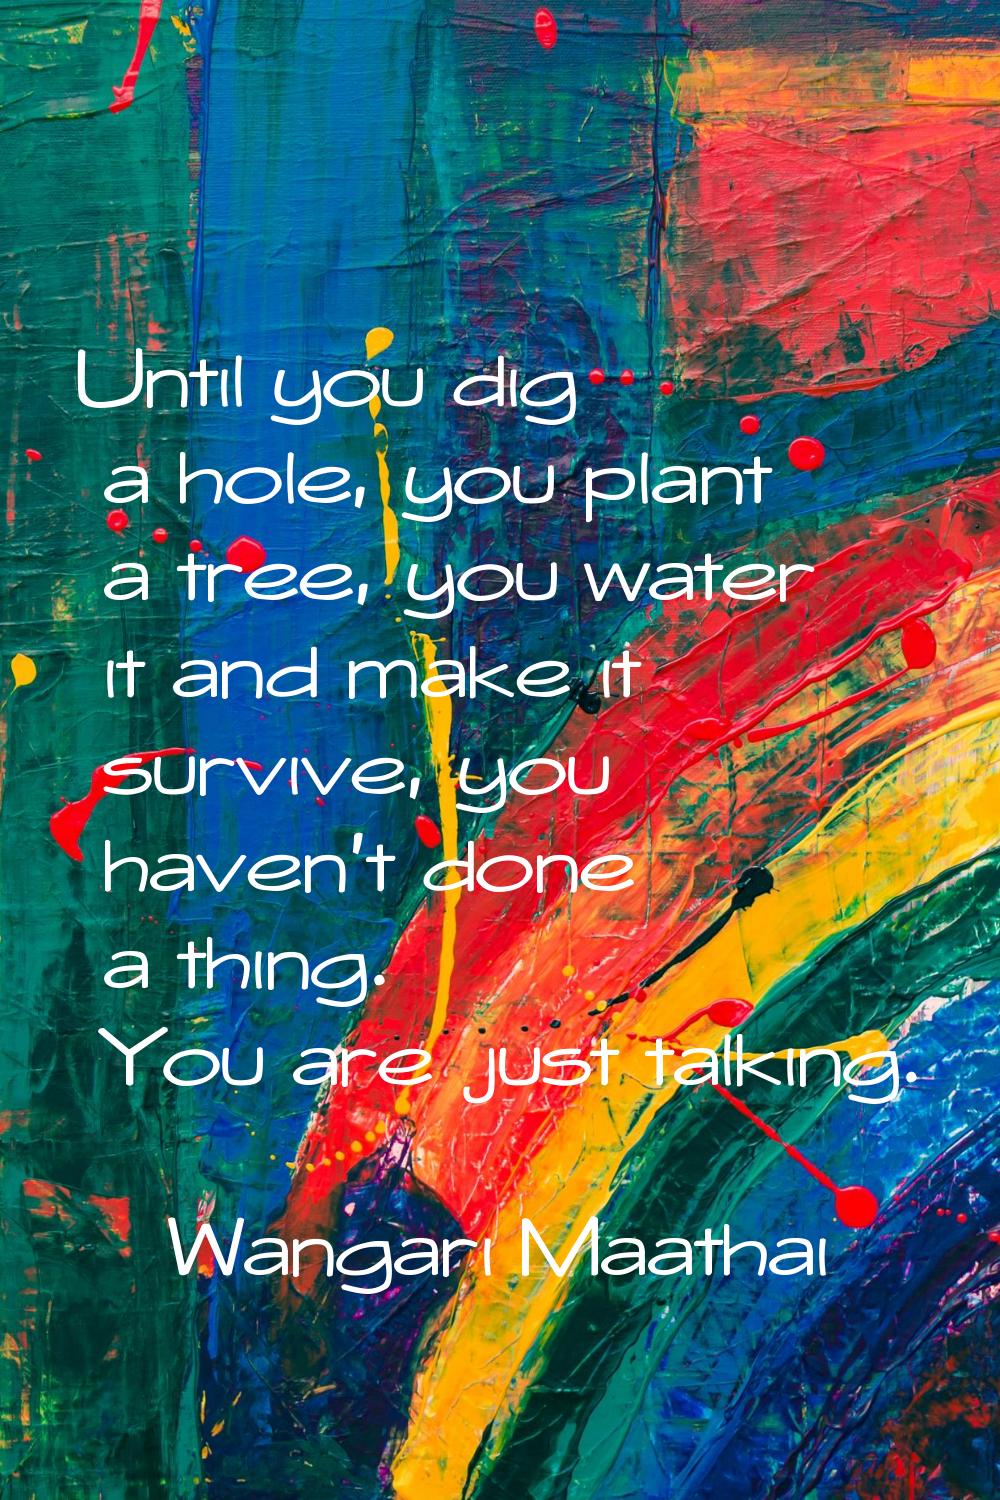 Until you dig a hole, you plant a tree, you water it and make it survive, you haven't done a thing.